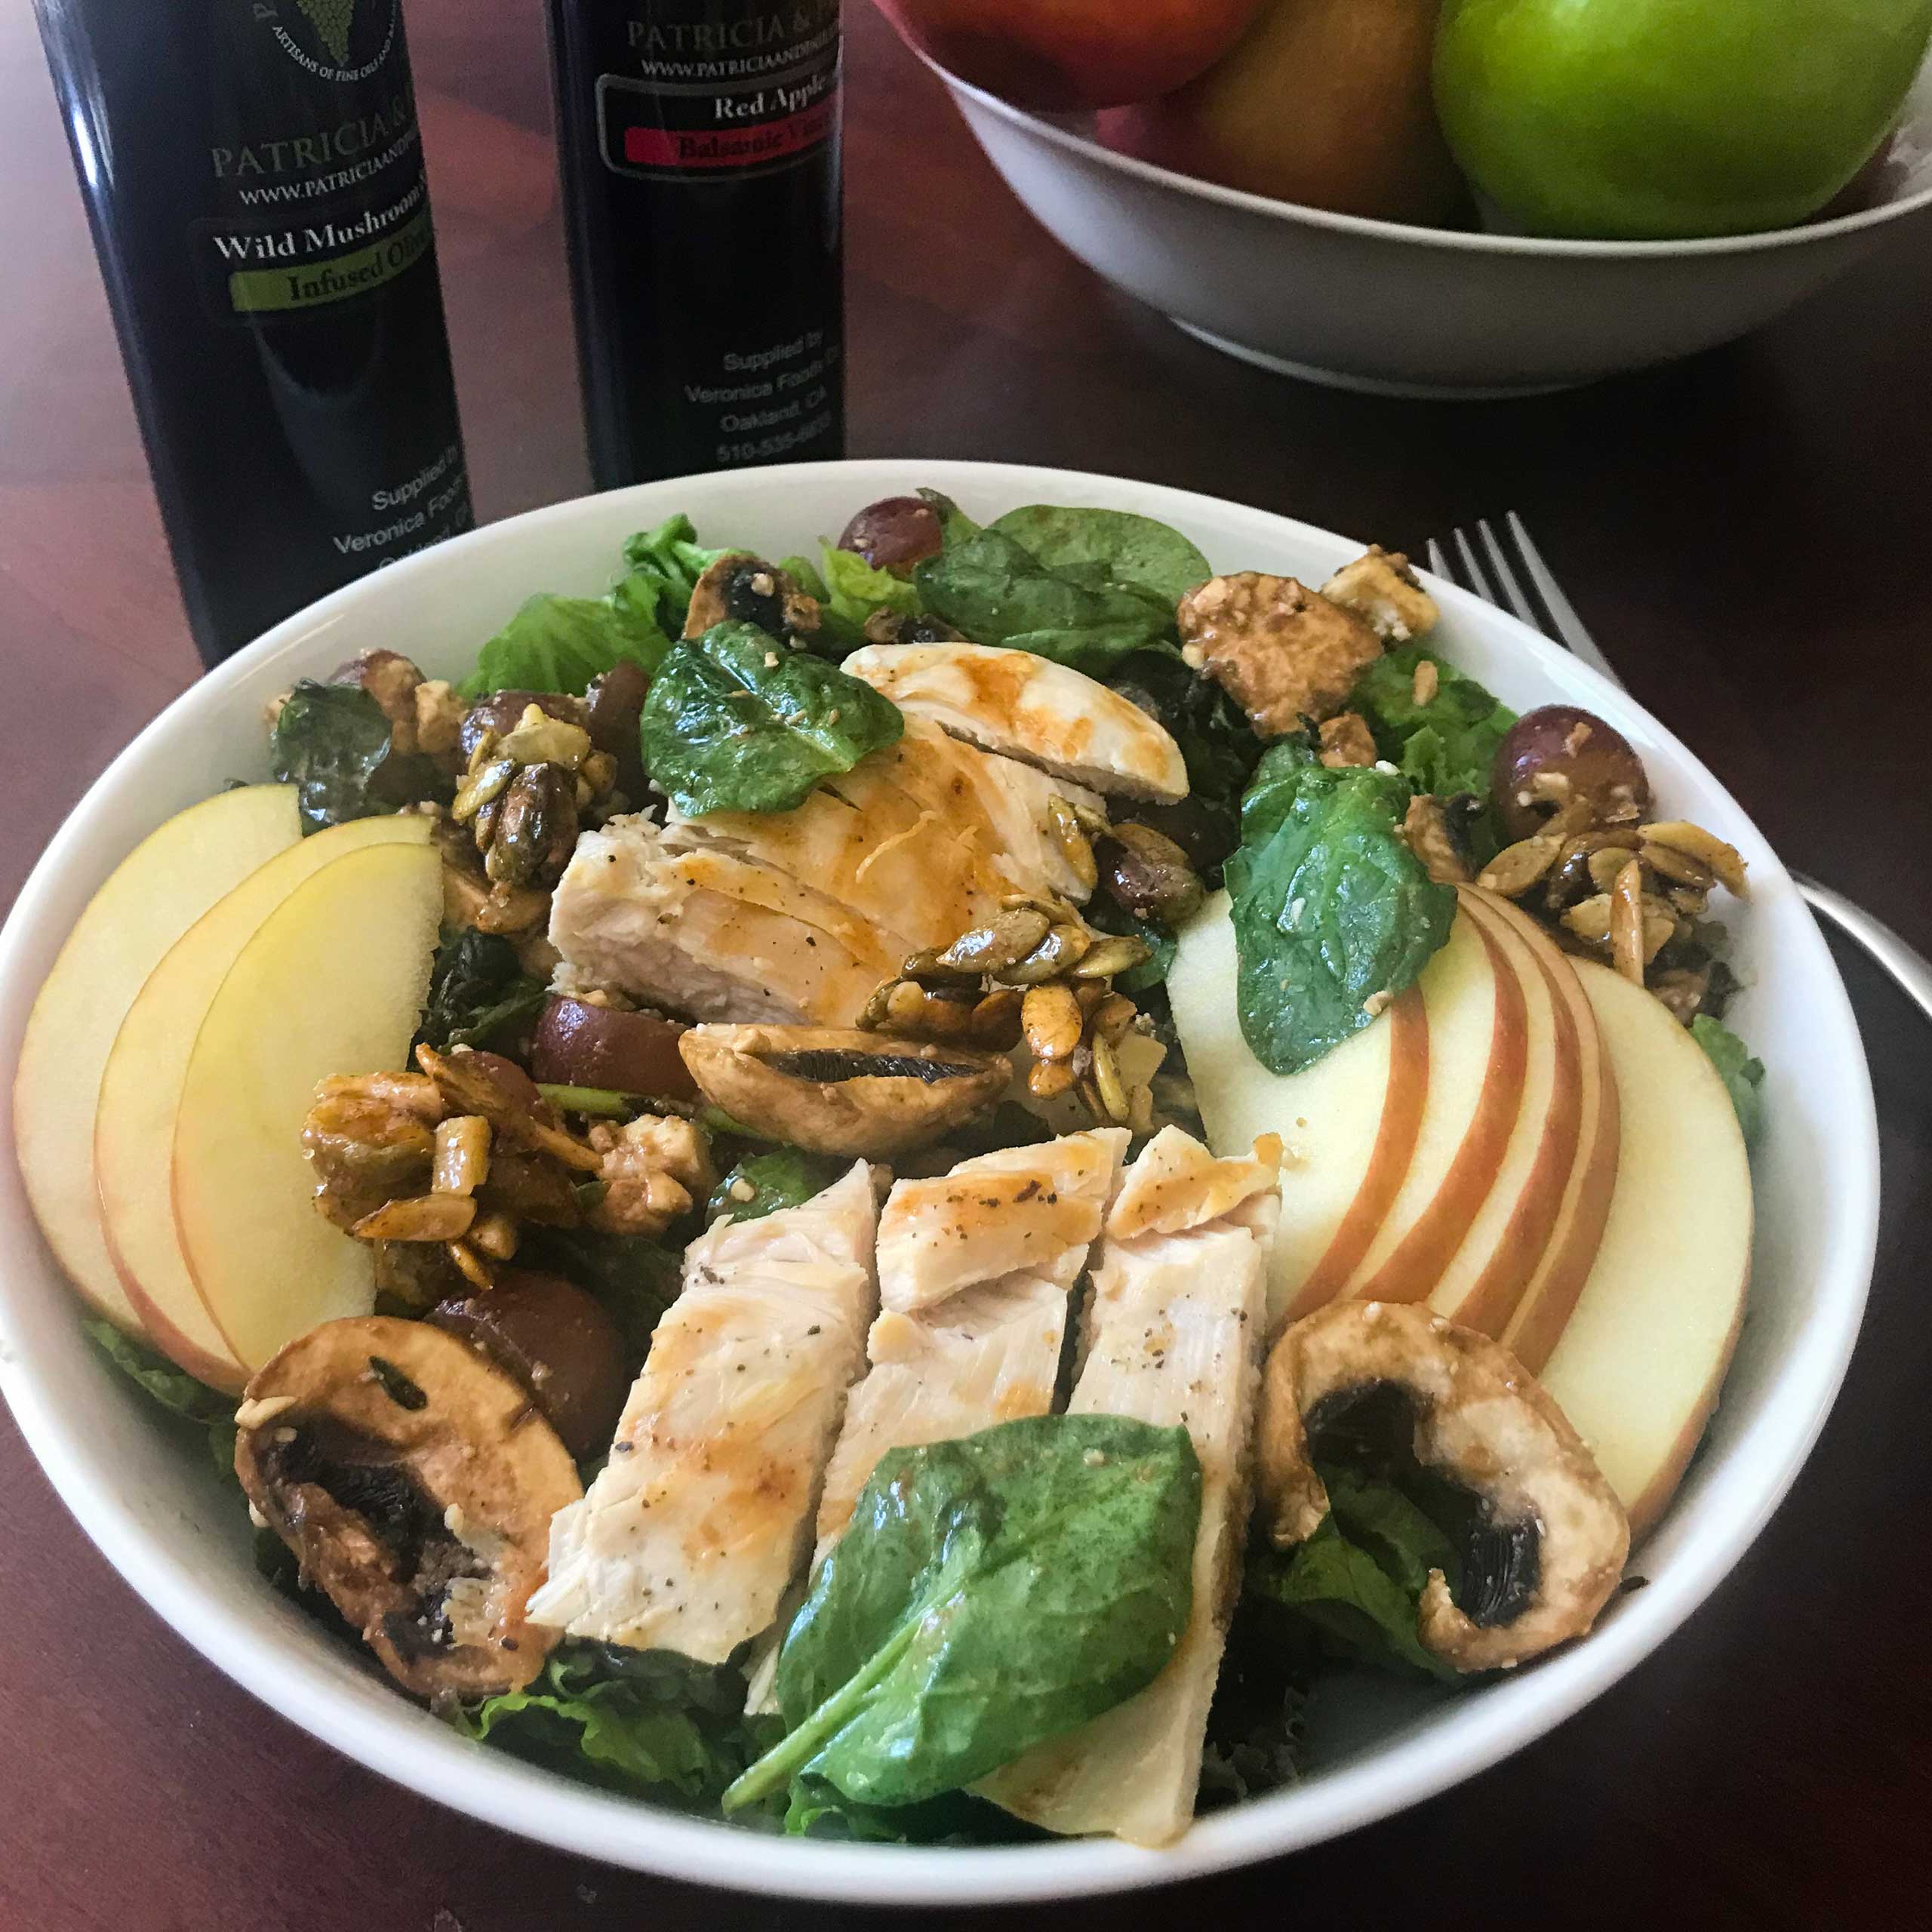 Red-Apple-and-Chicken-Salad-with-Nut-Clusters-12